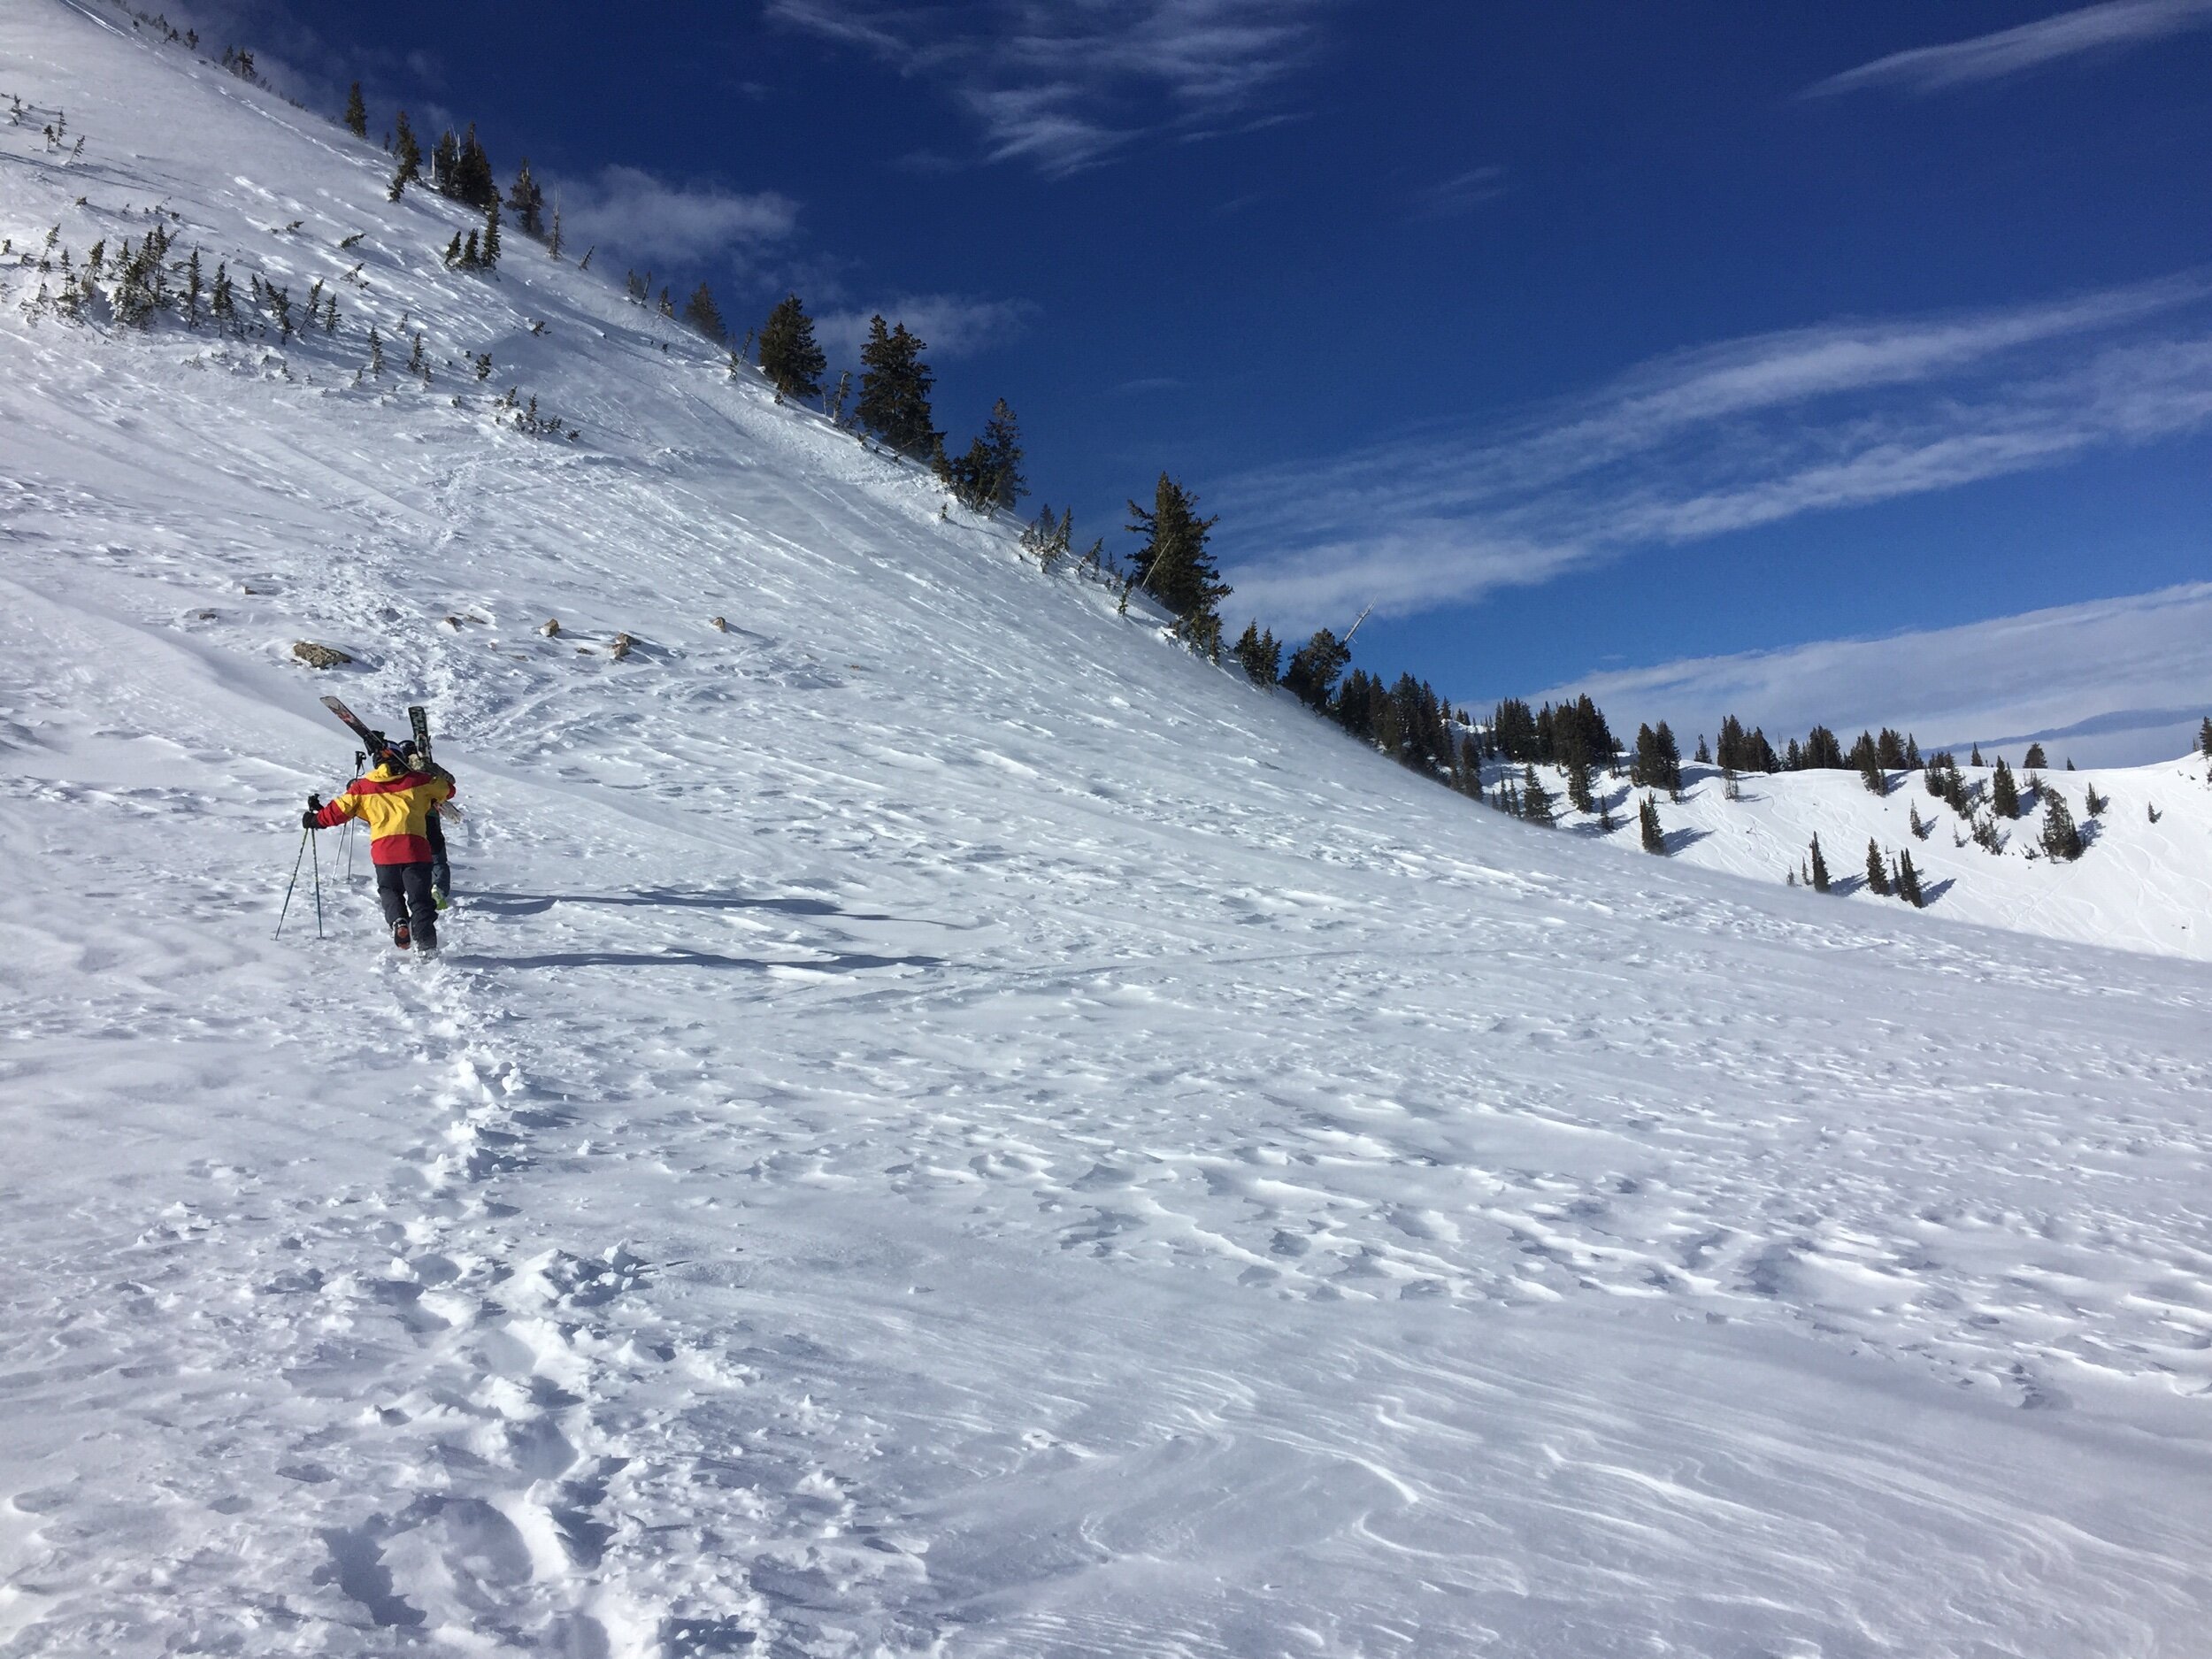 The most tempting ski lines are often in avelanche prone slopes